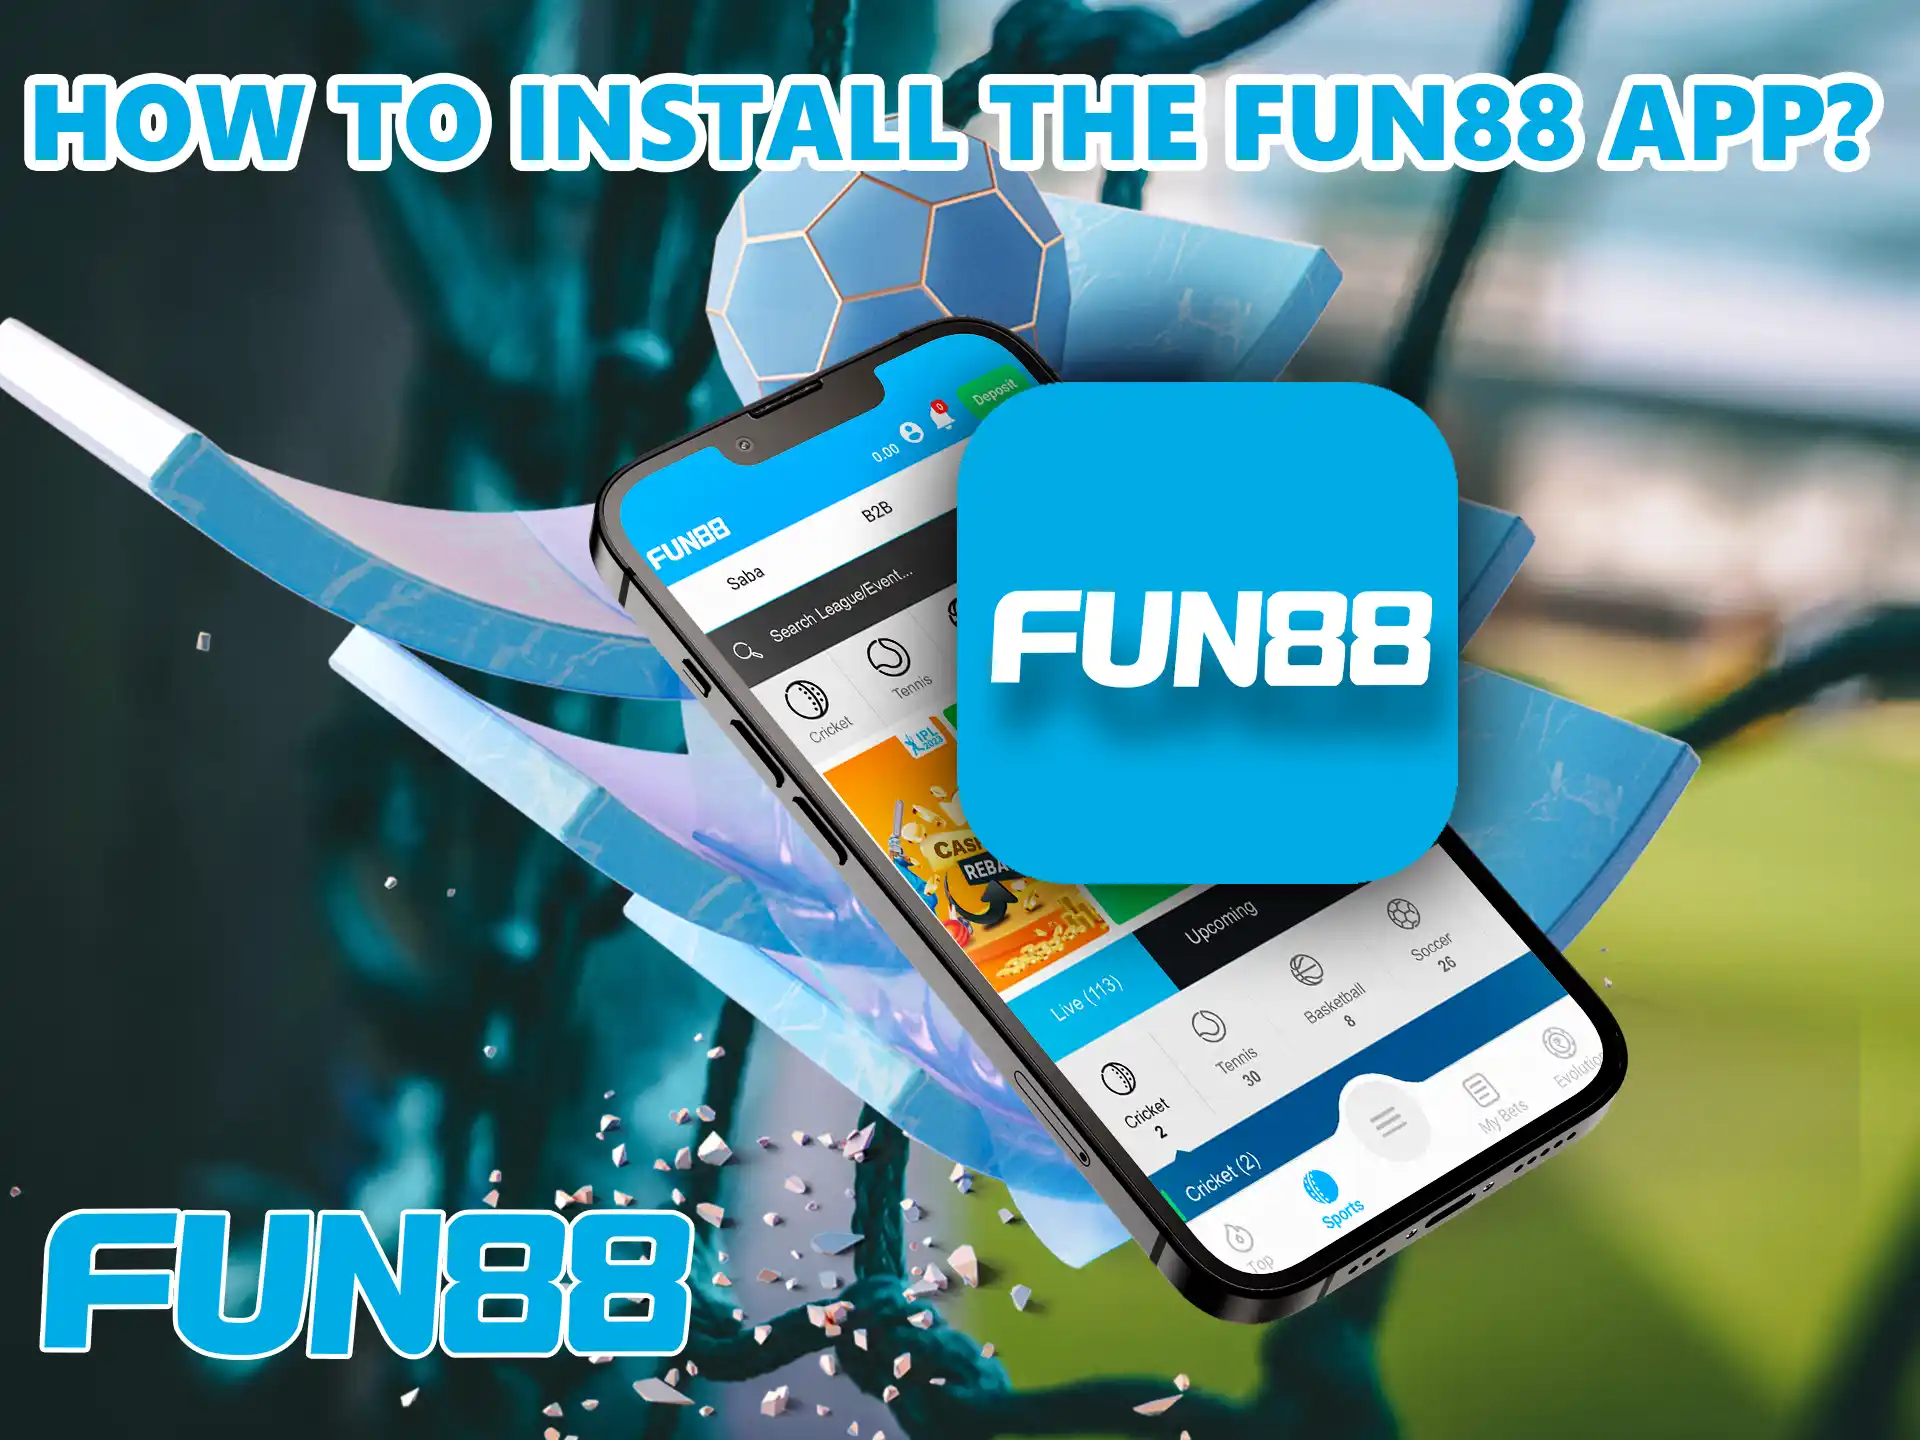 You've already read in detail how to get the Fun88 app, in the next step just open it and you're in game.